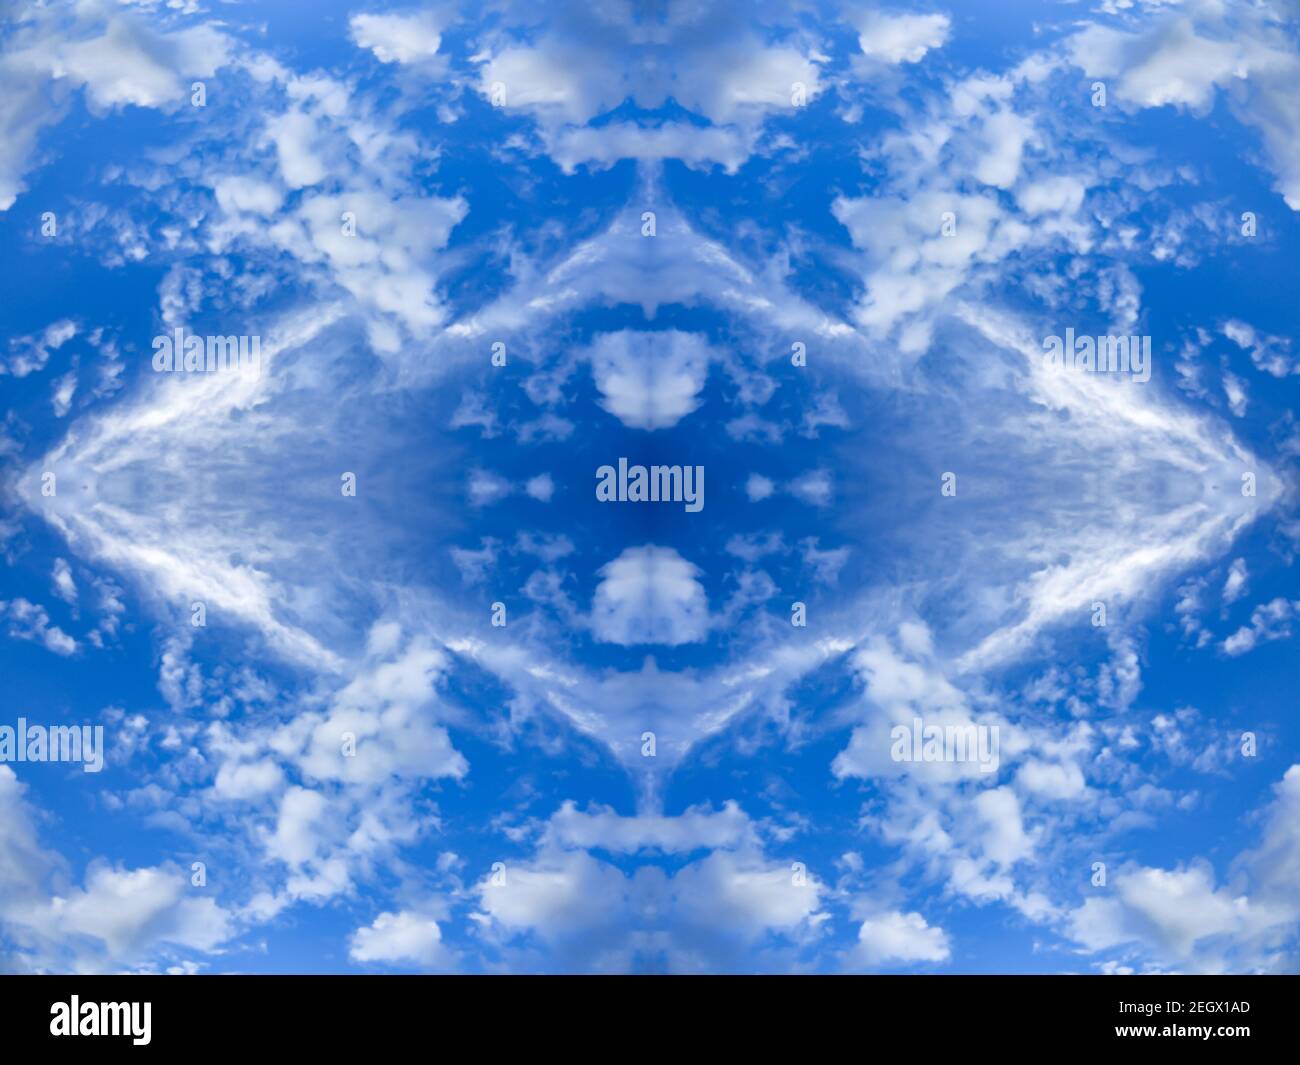 Blue sky with bright clouds. Mirror reflection, rhombus-shaped pattern. Blurred textured background with kaleidoscope effect. Abstract wallpaper Stock Photo